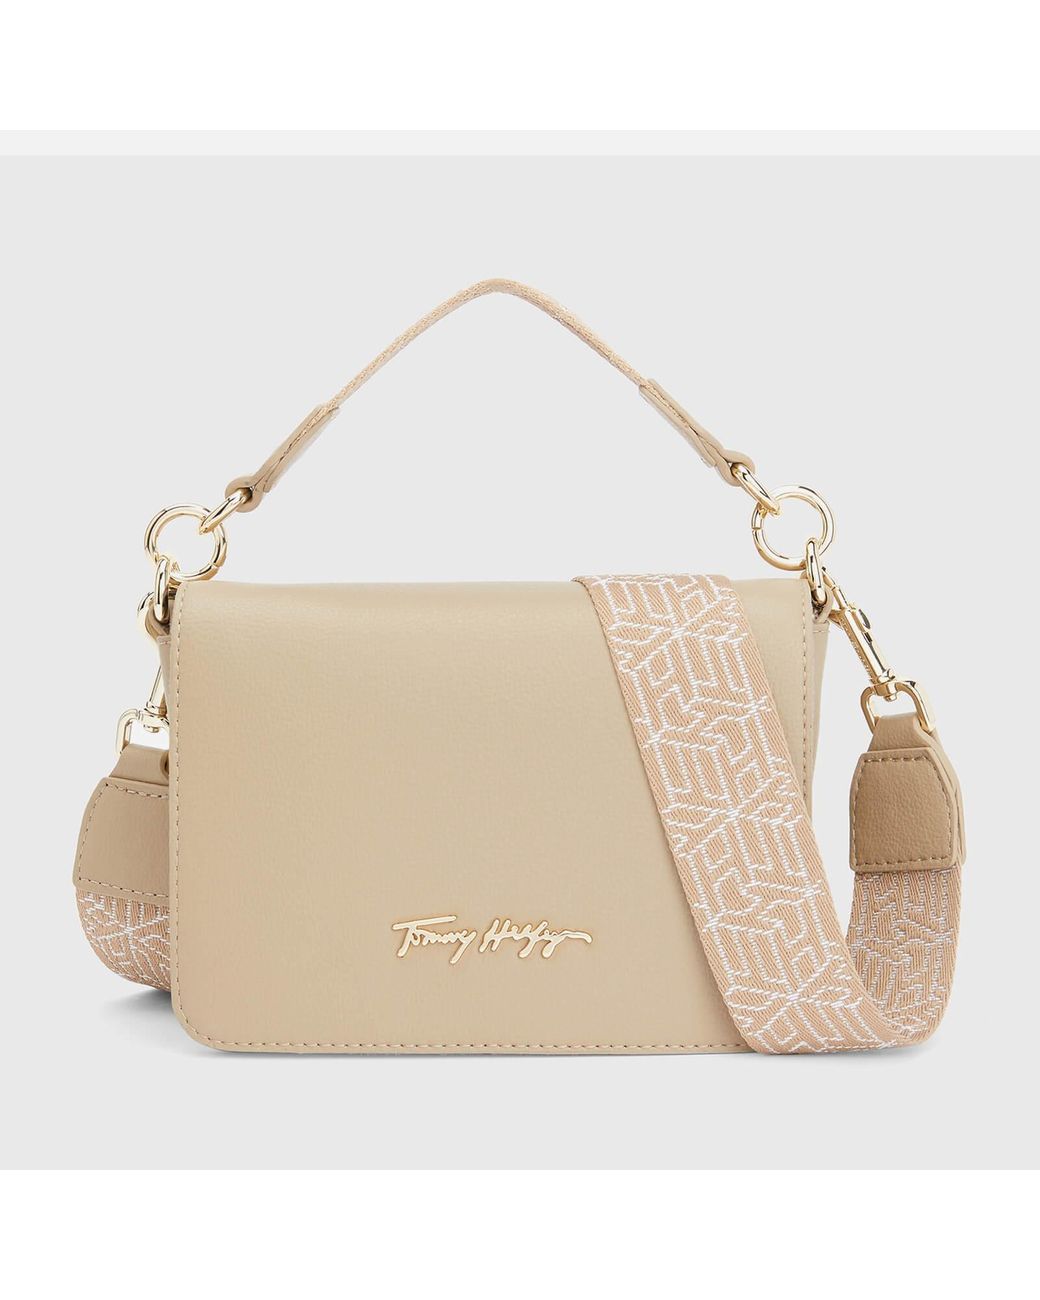 Tommy Hilfiger Joy Mini Faux Leather Cross-body Bag in Natural | Lyst Canada